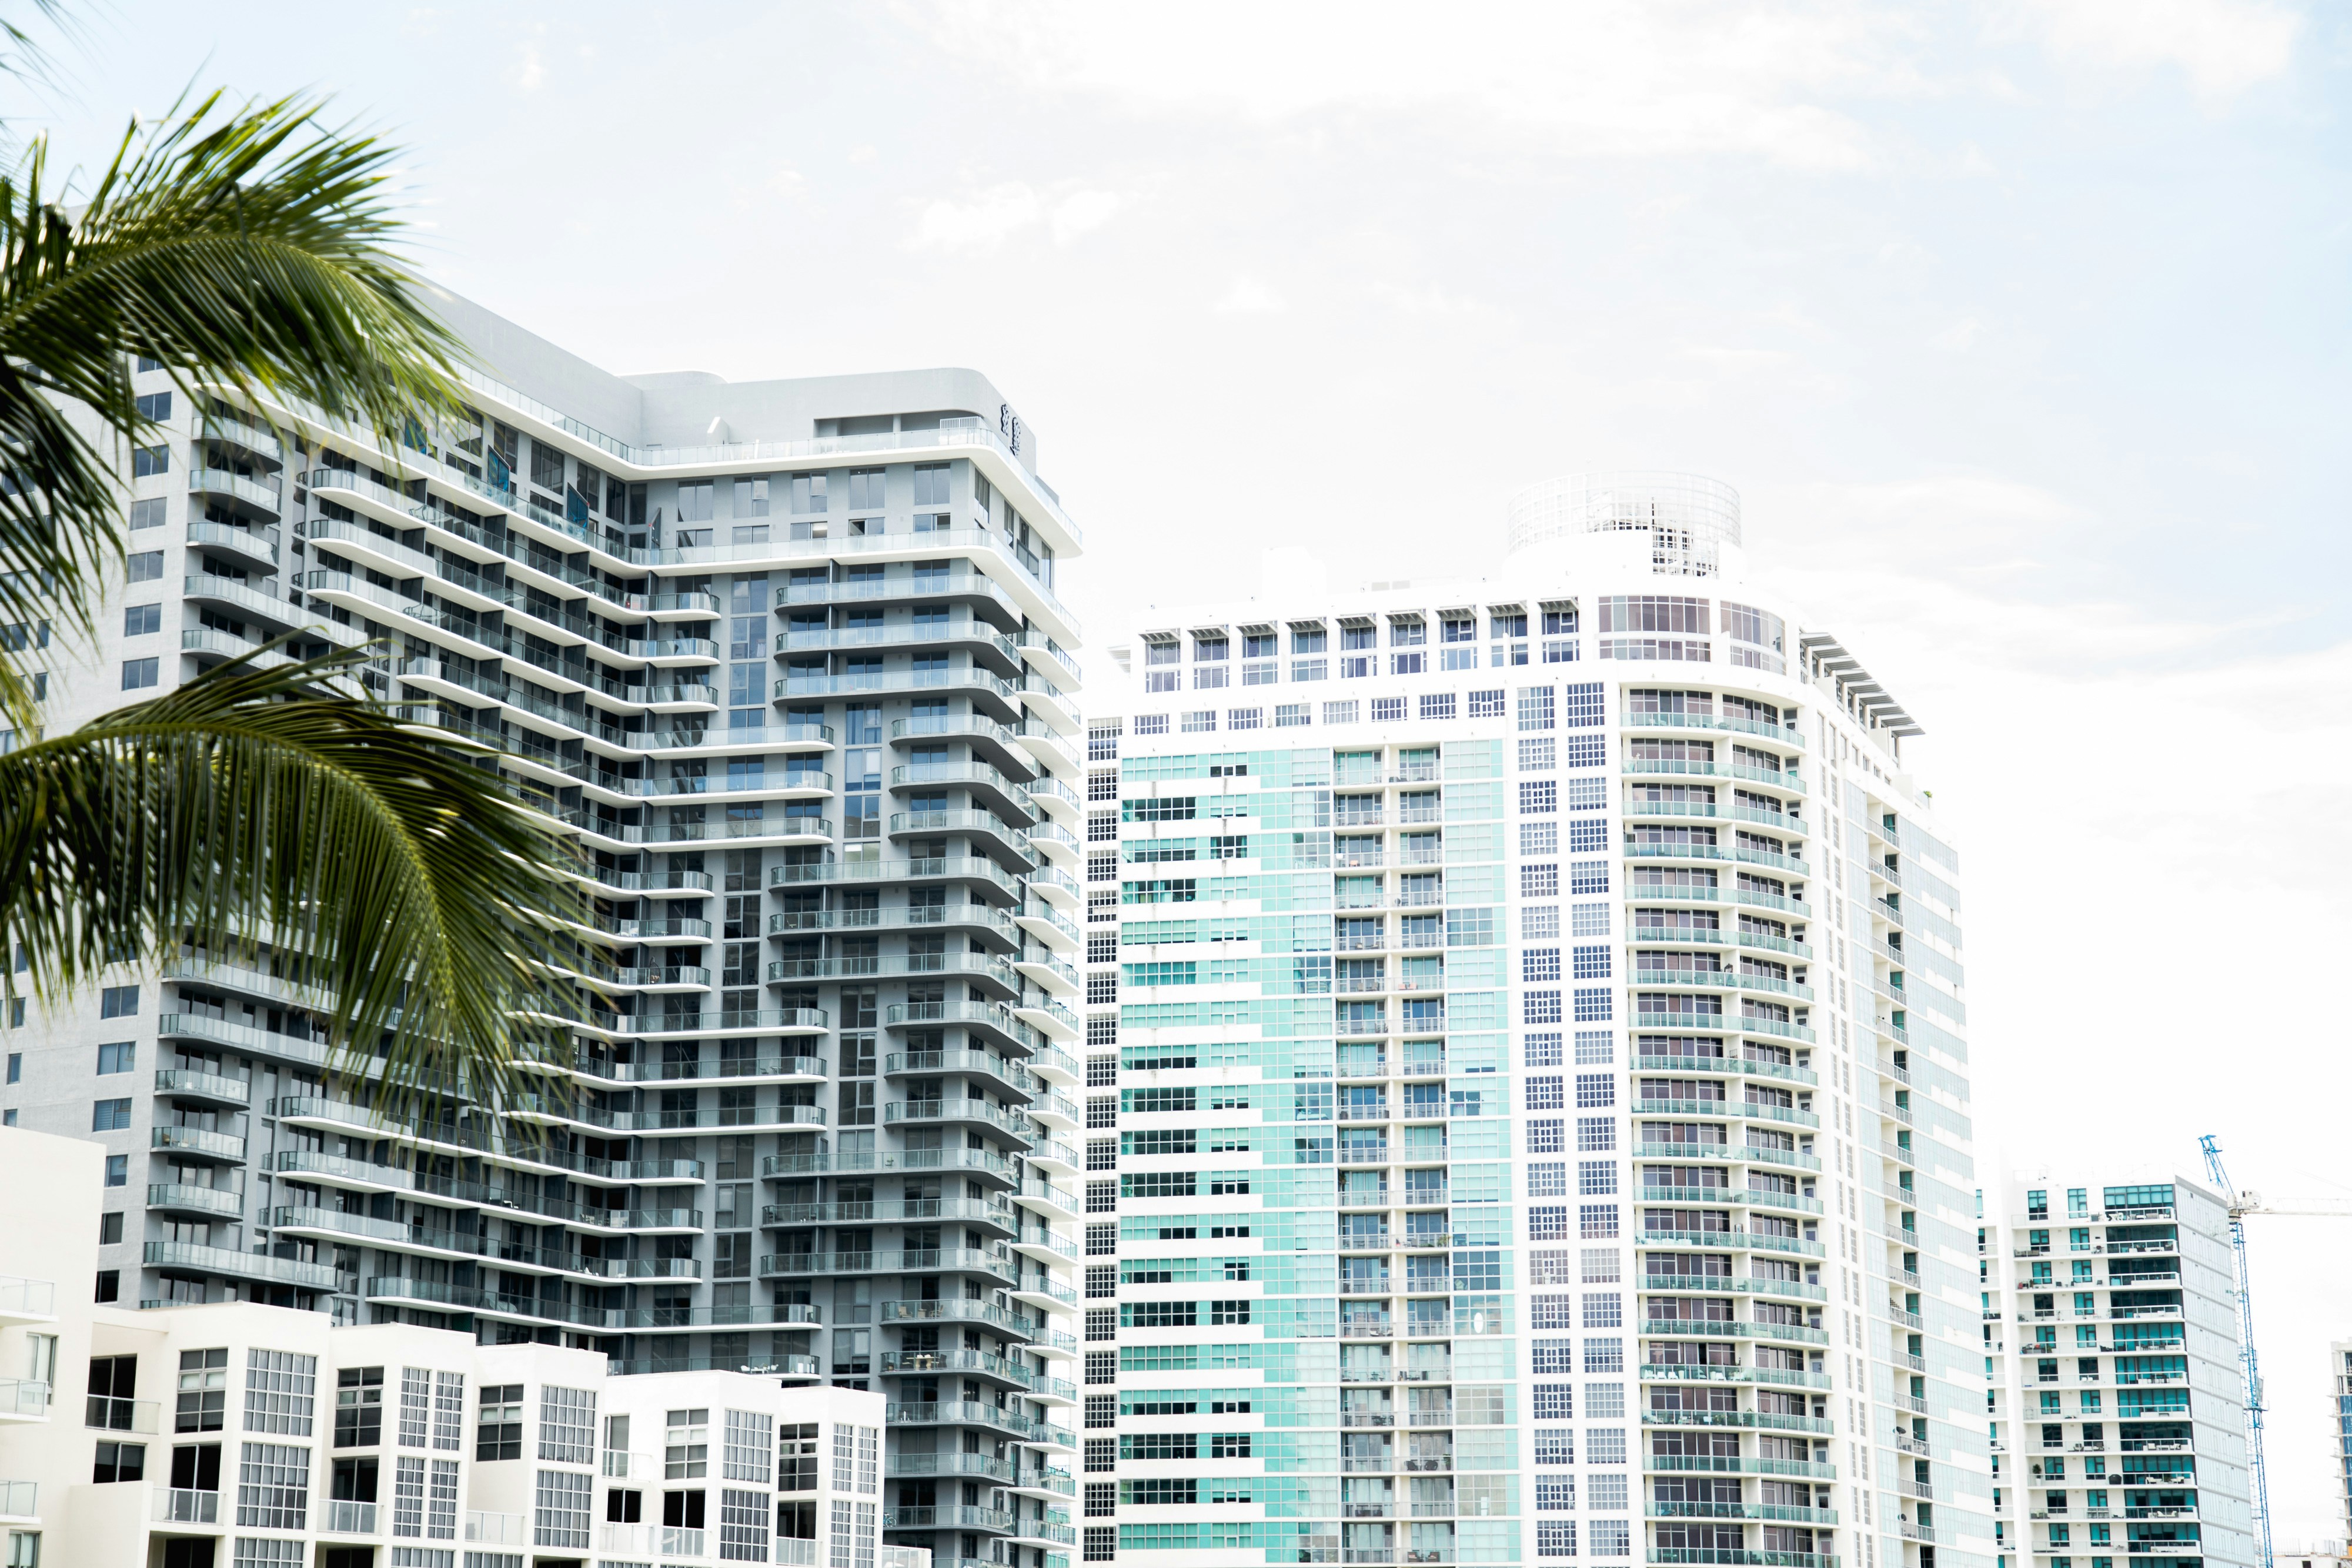 Downtown apartment complexes in Miami